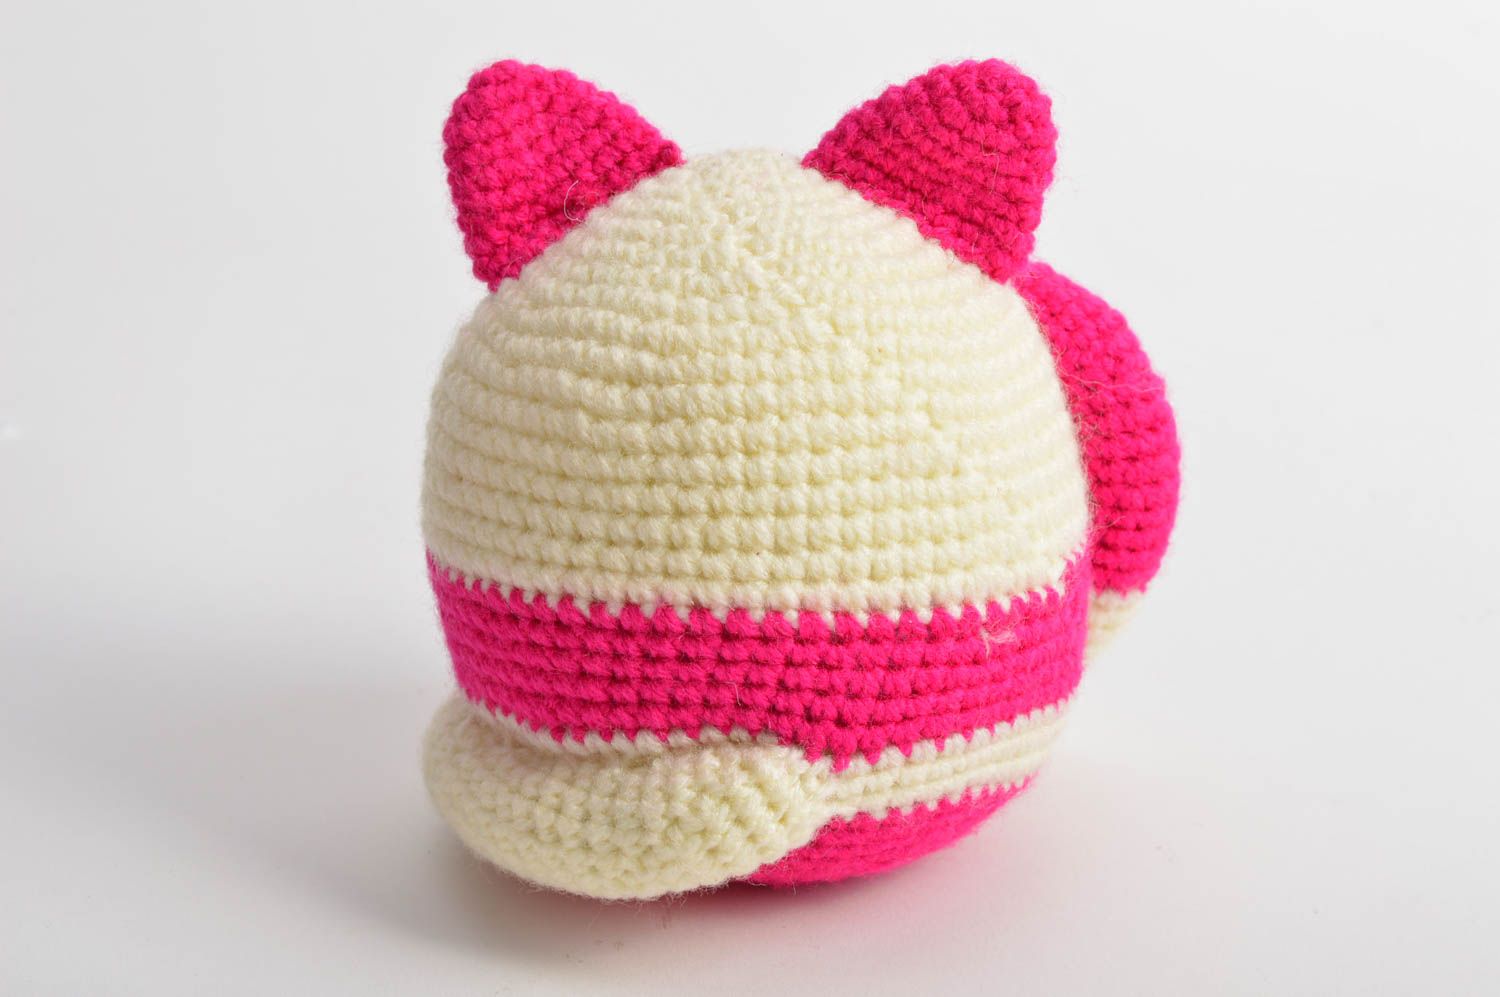 Handmade cute crocheted pink and white funny round toy in shape of cat photo 4